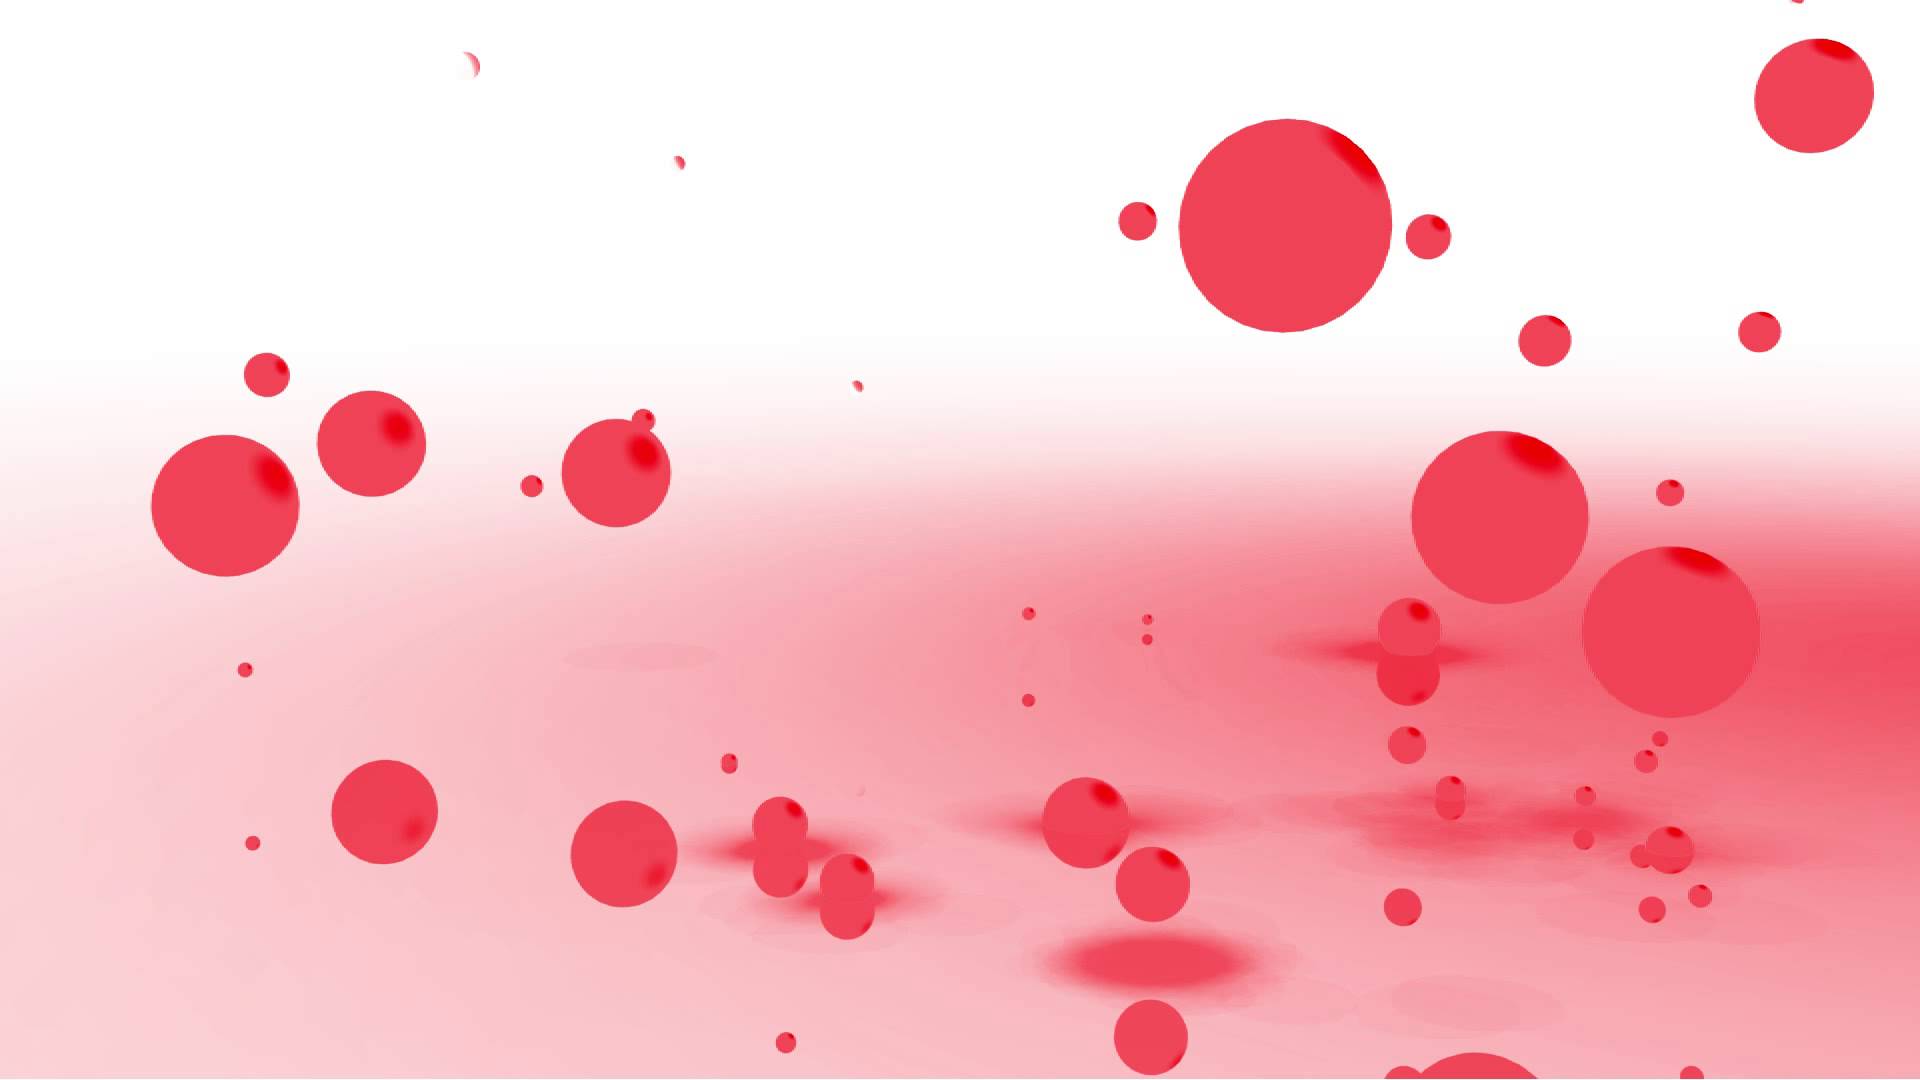 Red and white video background